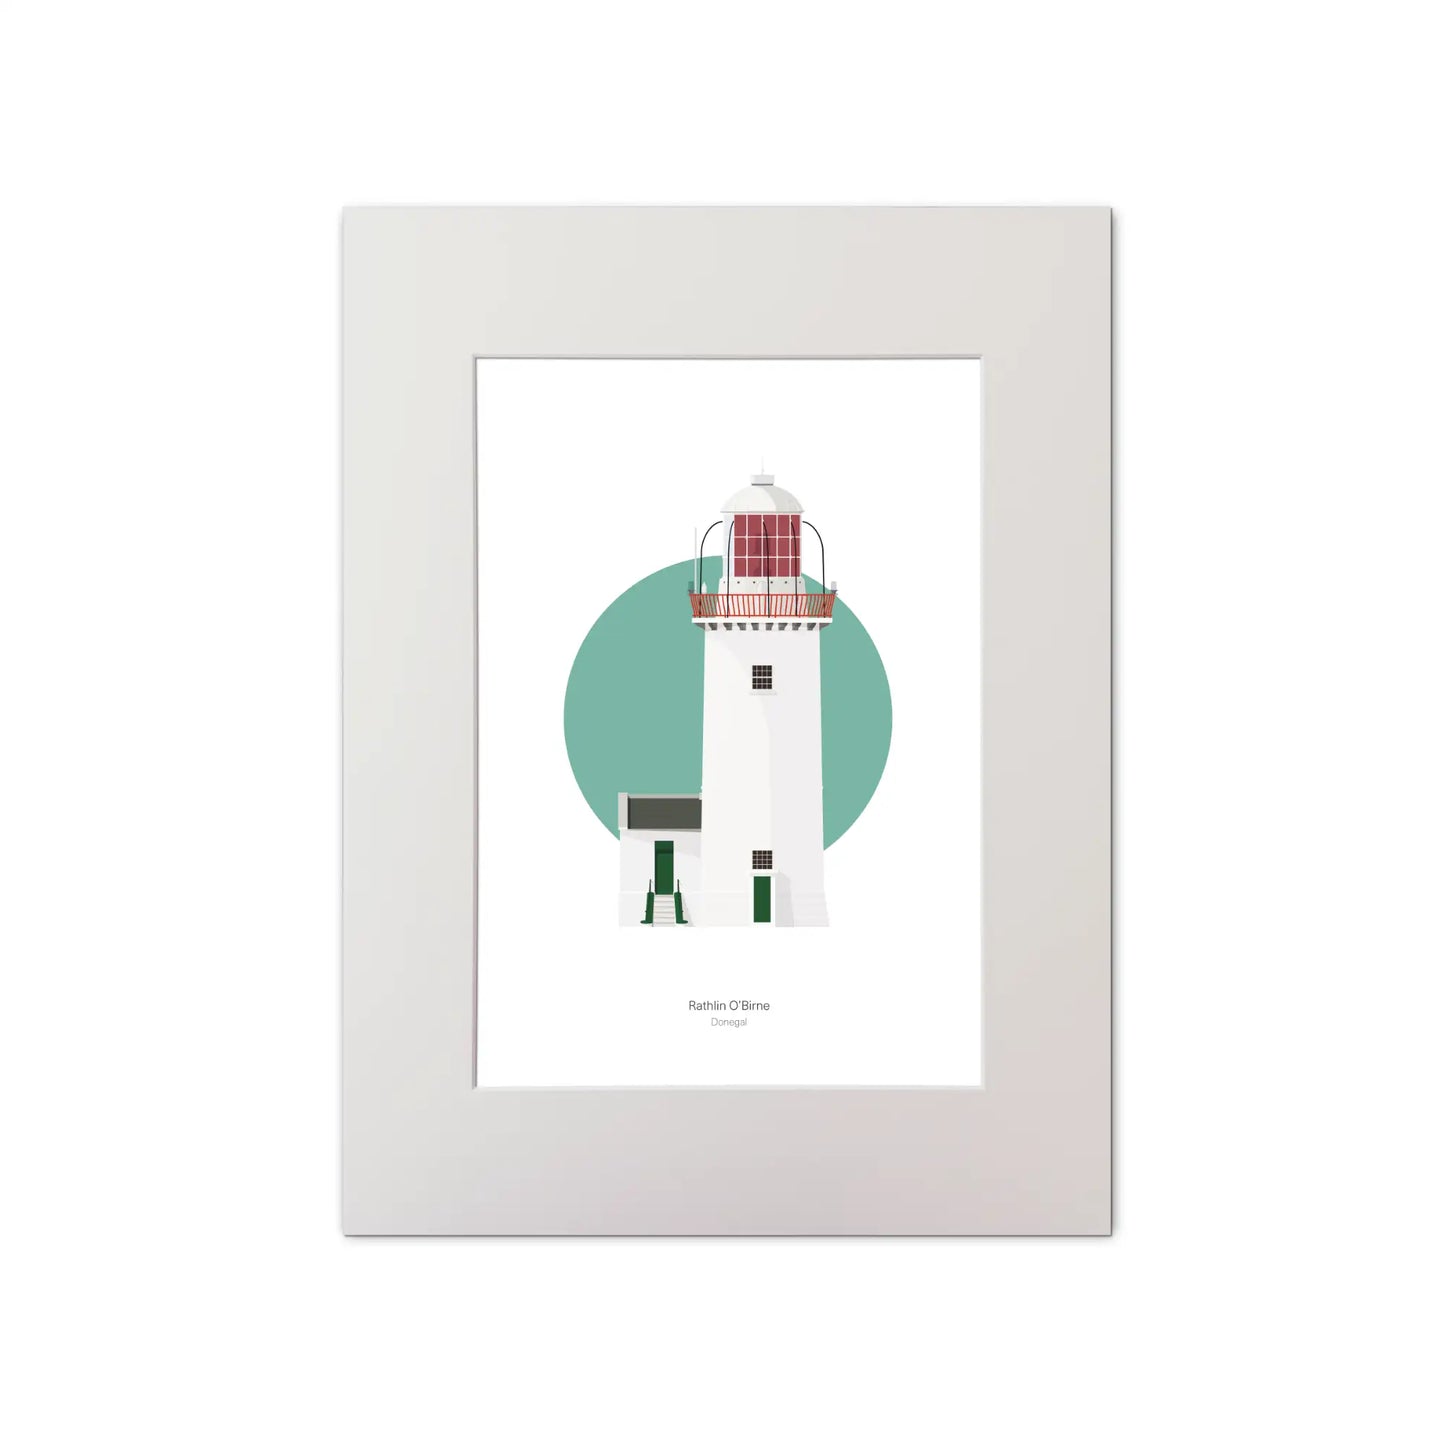 Contemporary graphic illustration of Rathlin O’Birne lighthouse on a white background inside light blue square, mounted and measuring 30x40cm.